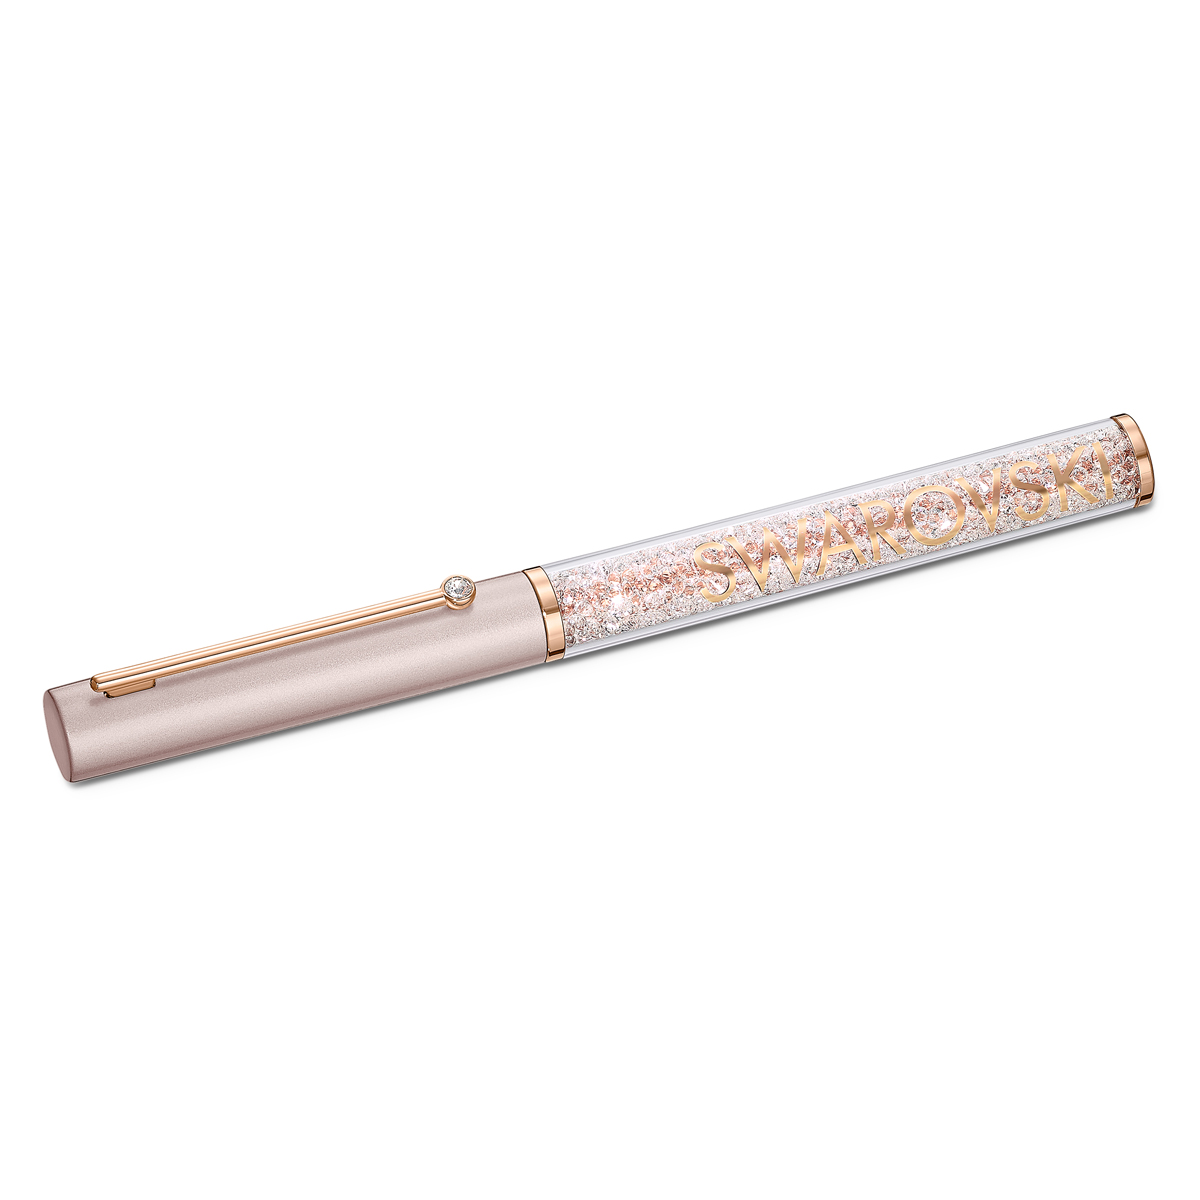 Swarovski Crystalline Gloss Ballpoint Pen, Pink and Rose Gold Tone Plated